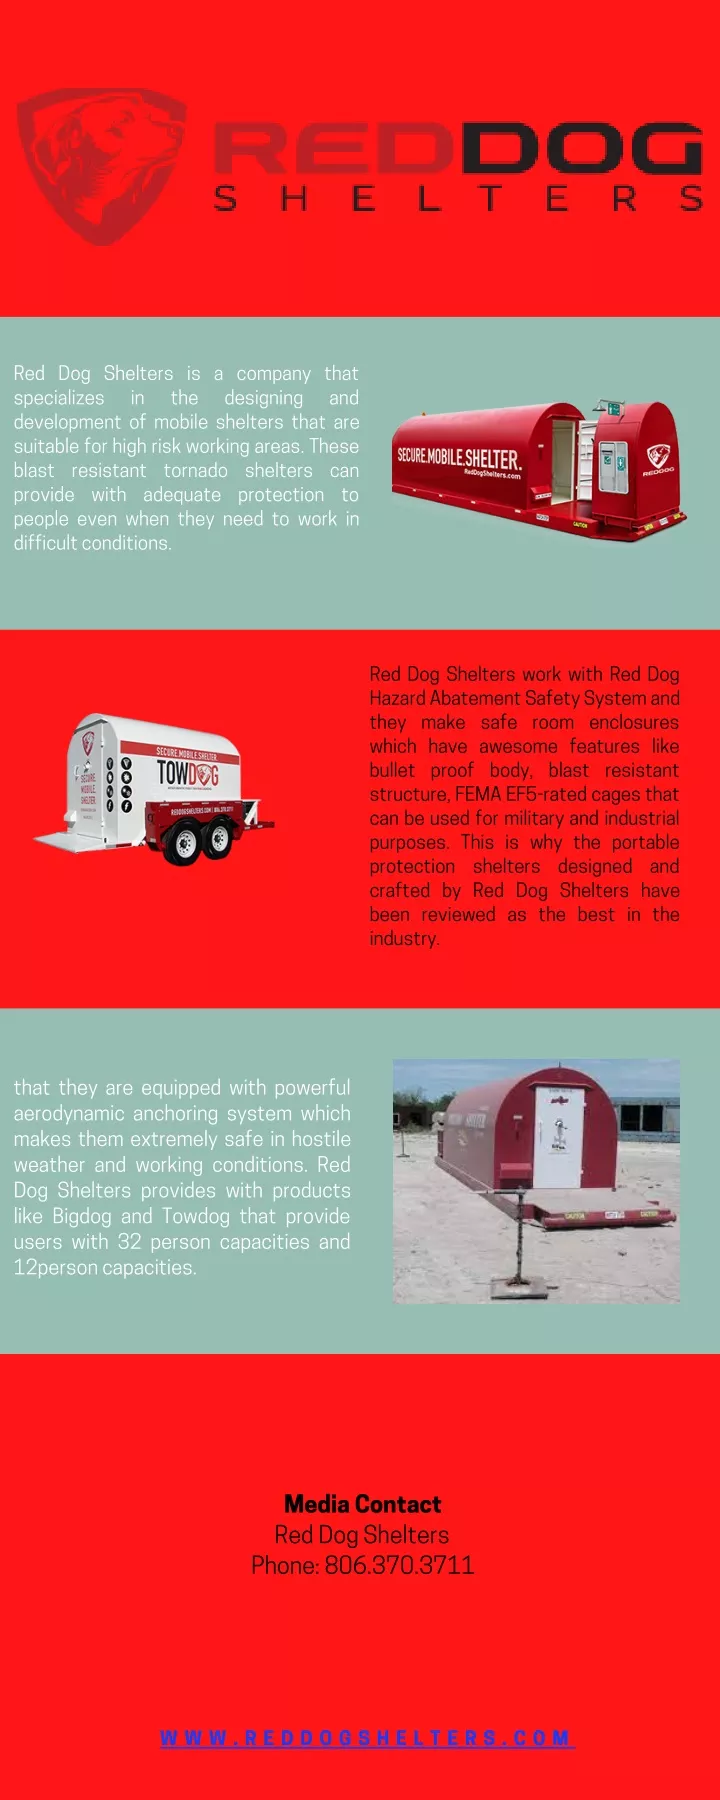 red dog shelters is a company that specializes